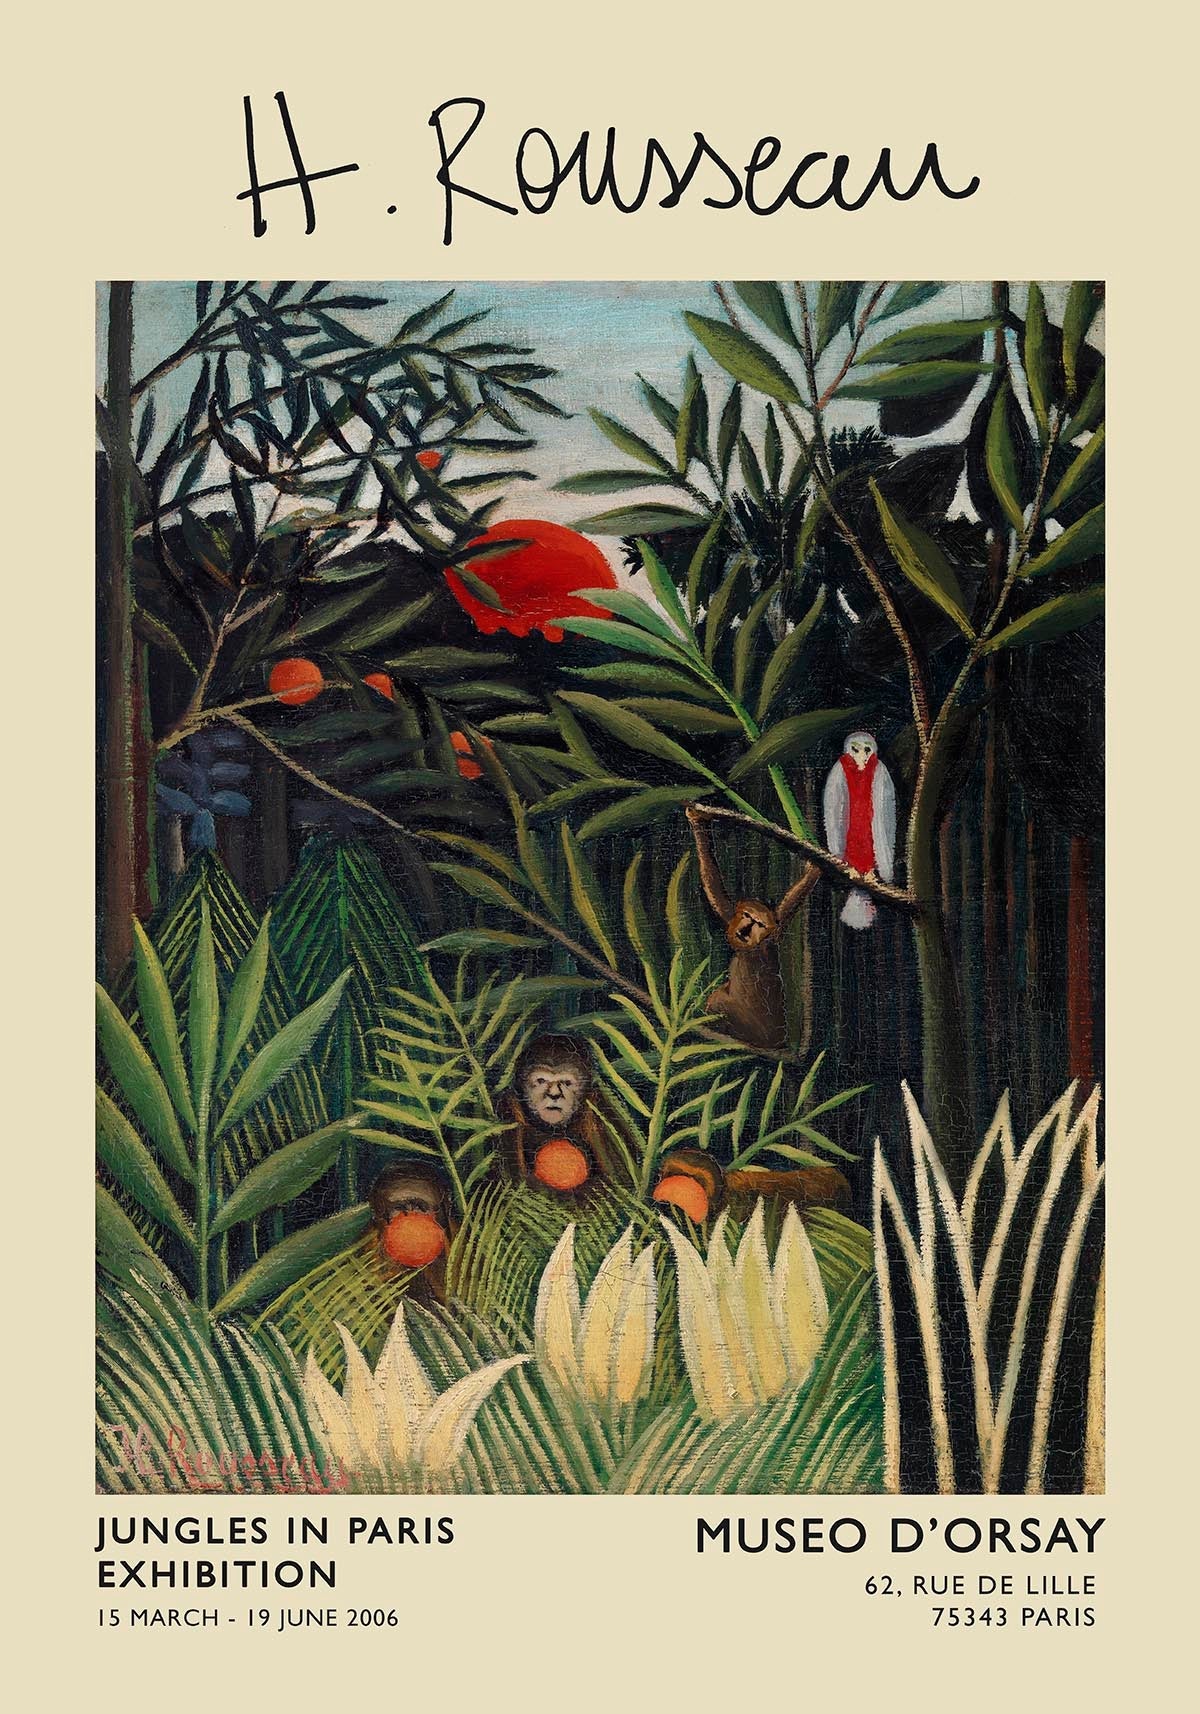 Monkeys and Parrot Rousseau Exhibition Poster